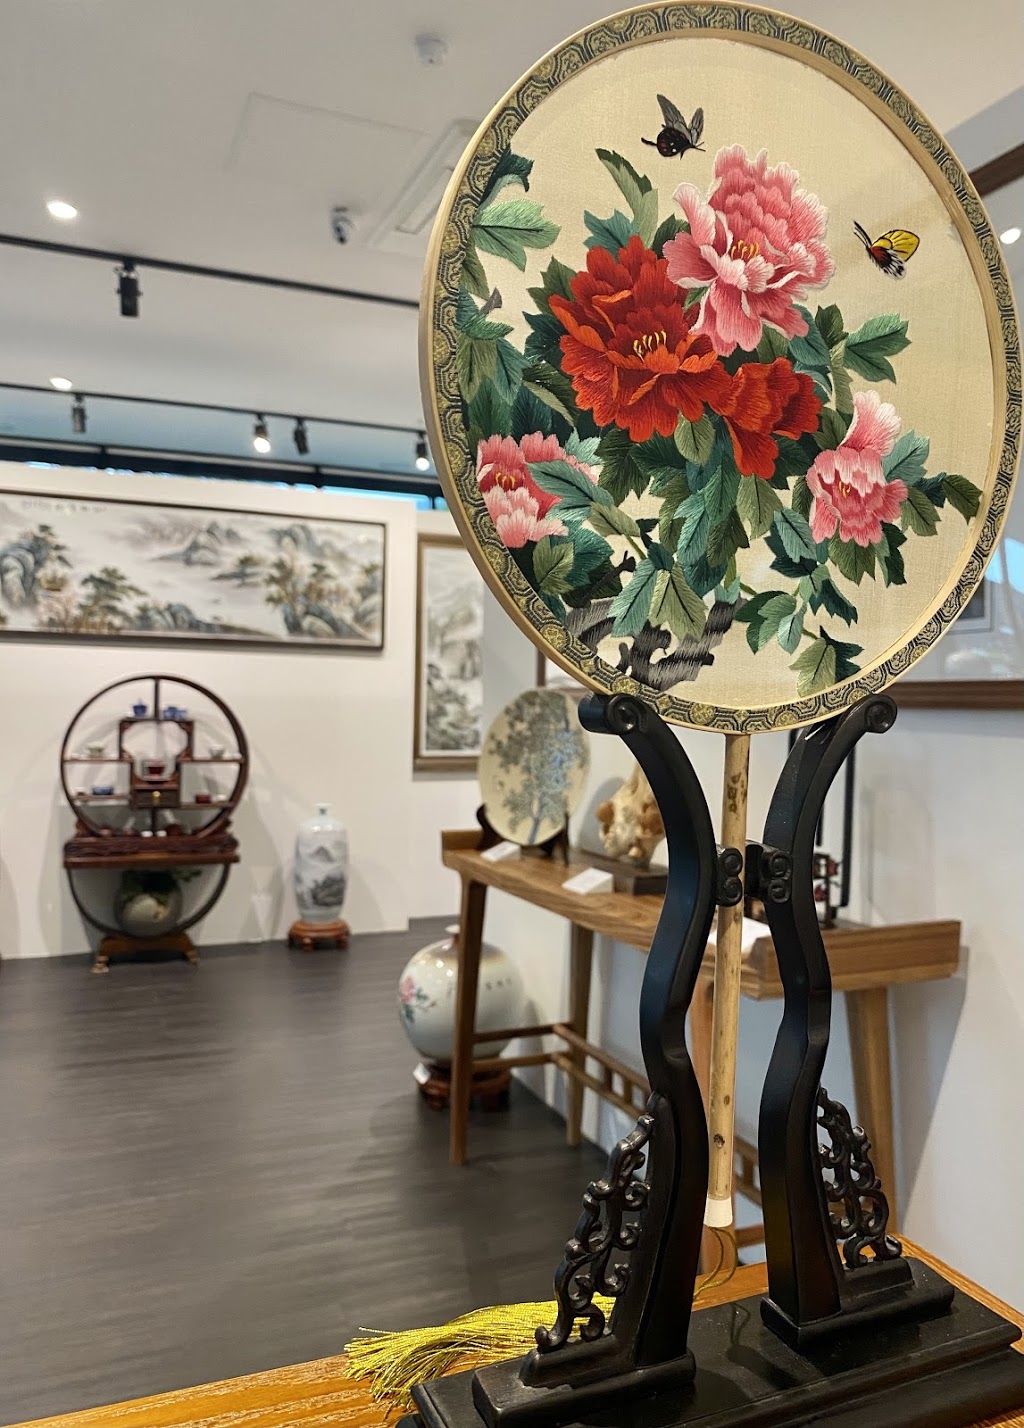 Yue Yuan Gallery and Home Decor | art gallery | Ground Floor, Shop 2/581-587 Gardeners Rd, Mascot NSW 2020, Australia | 0467775555 OR +61 467 775 555